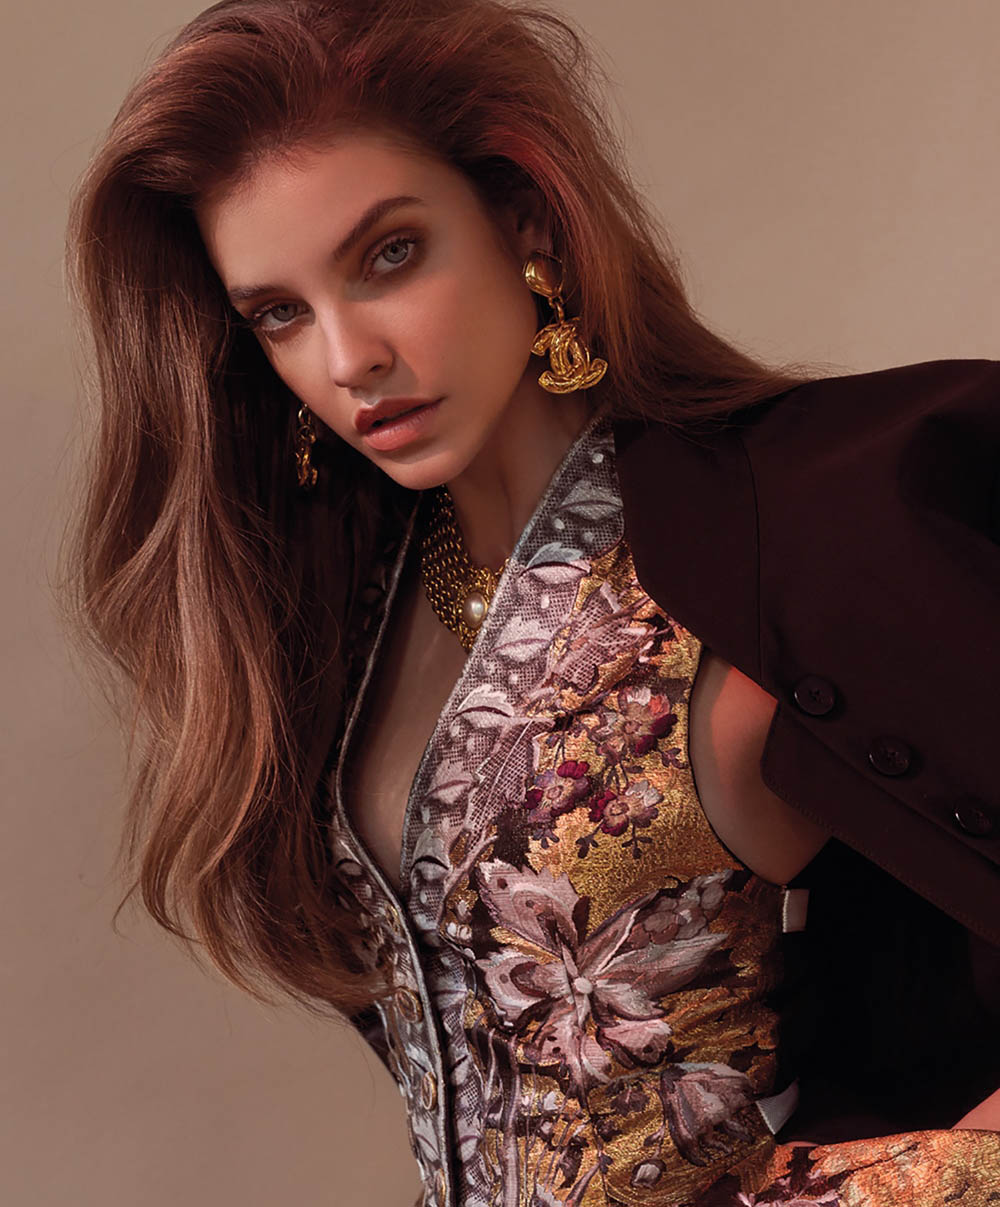 Barbara Palvin covers Vogue Portugal March 2018 by Andreas Ortner